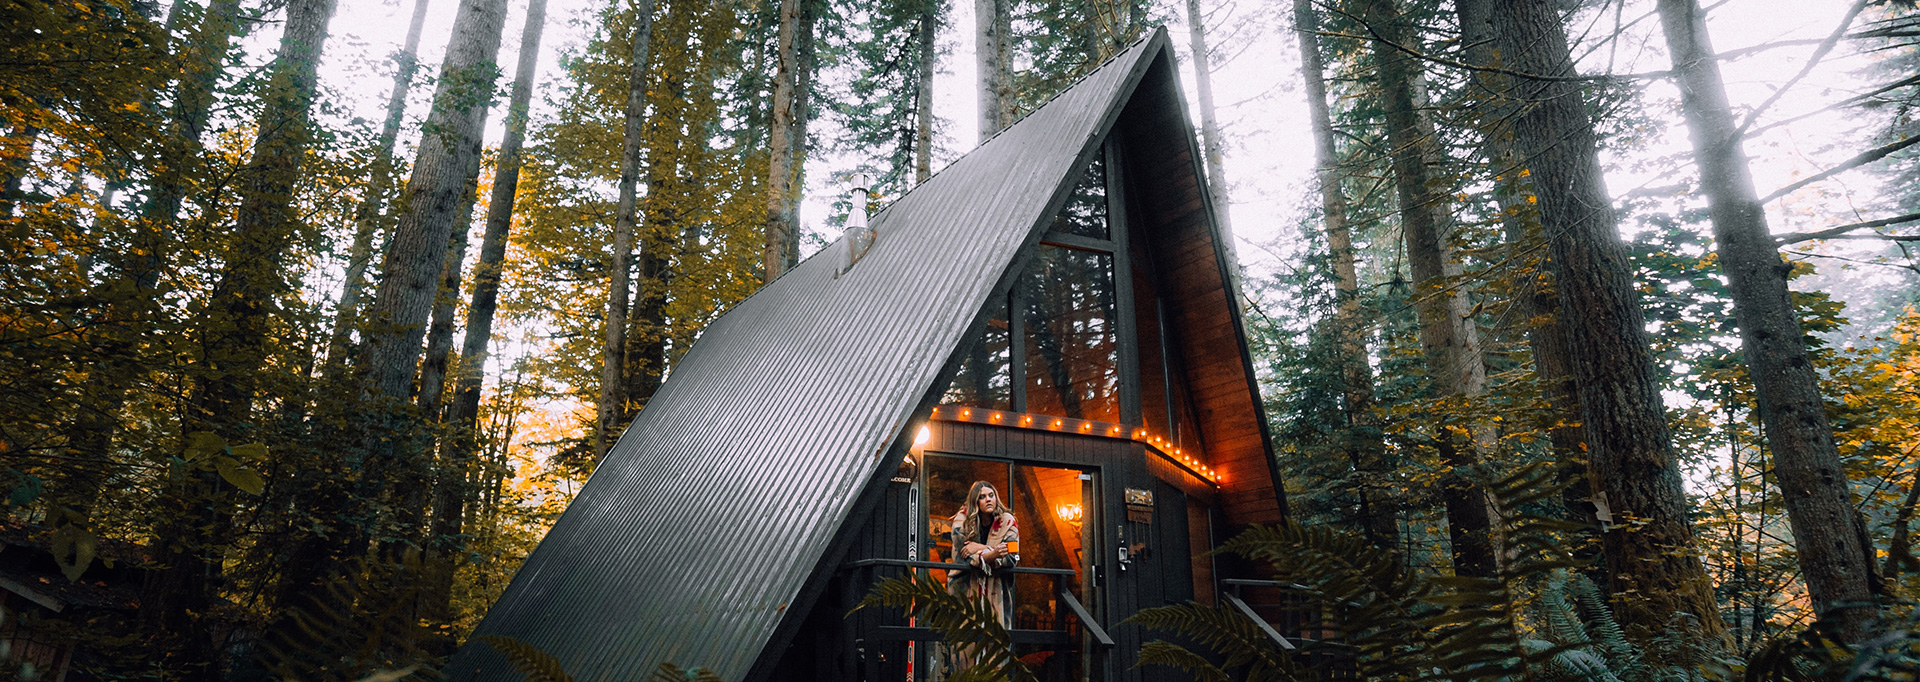 A frame house in the woods